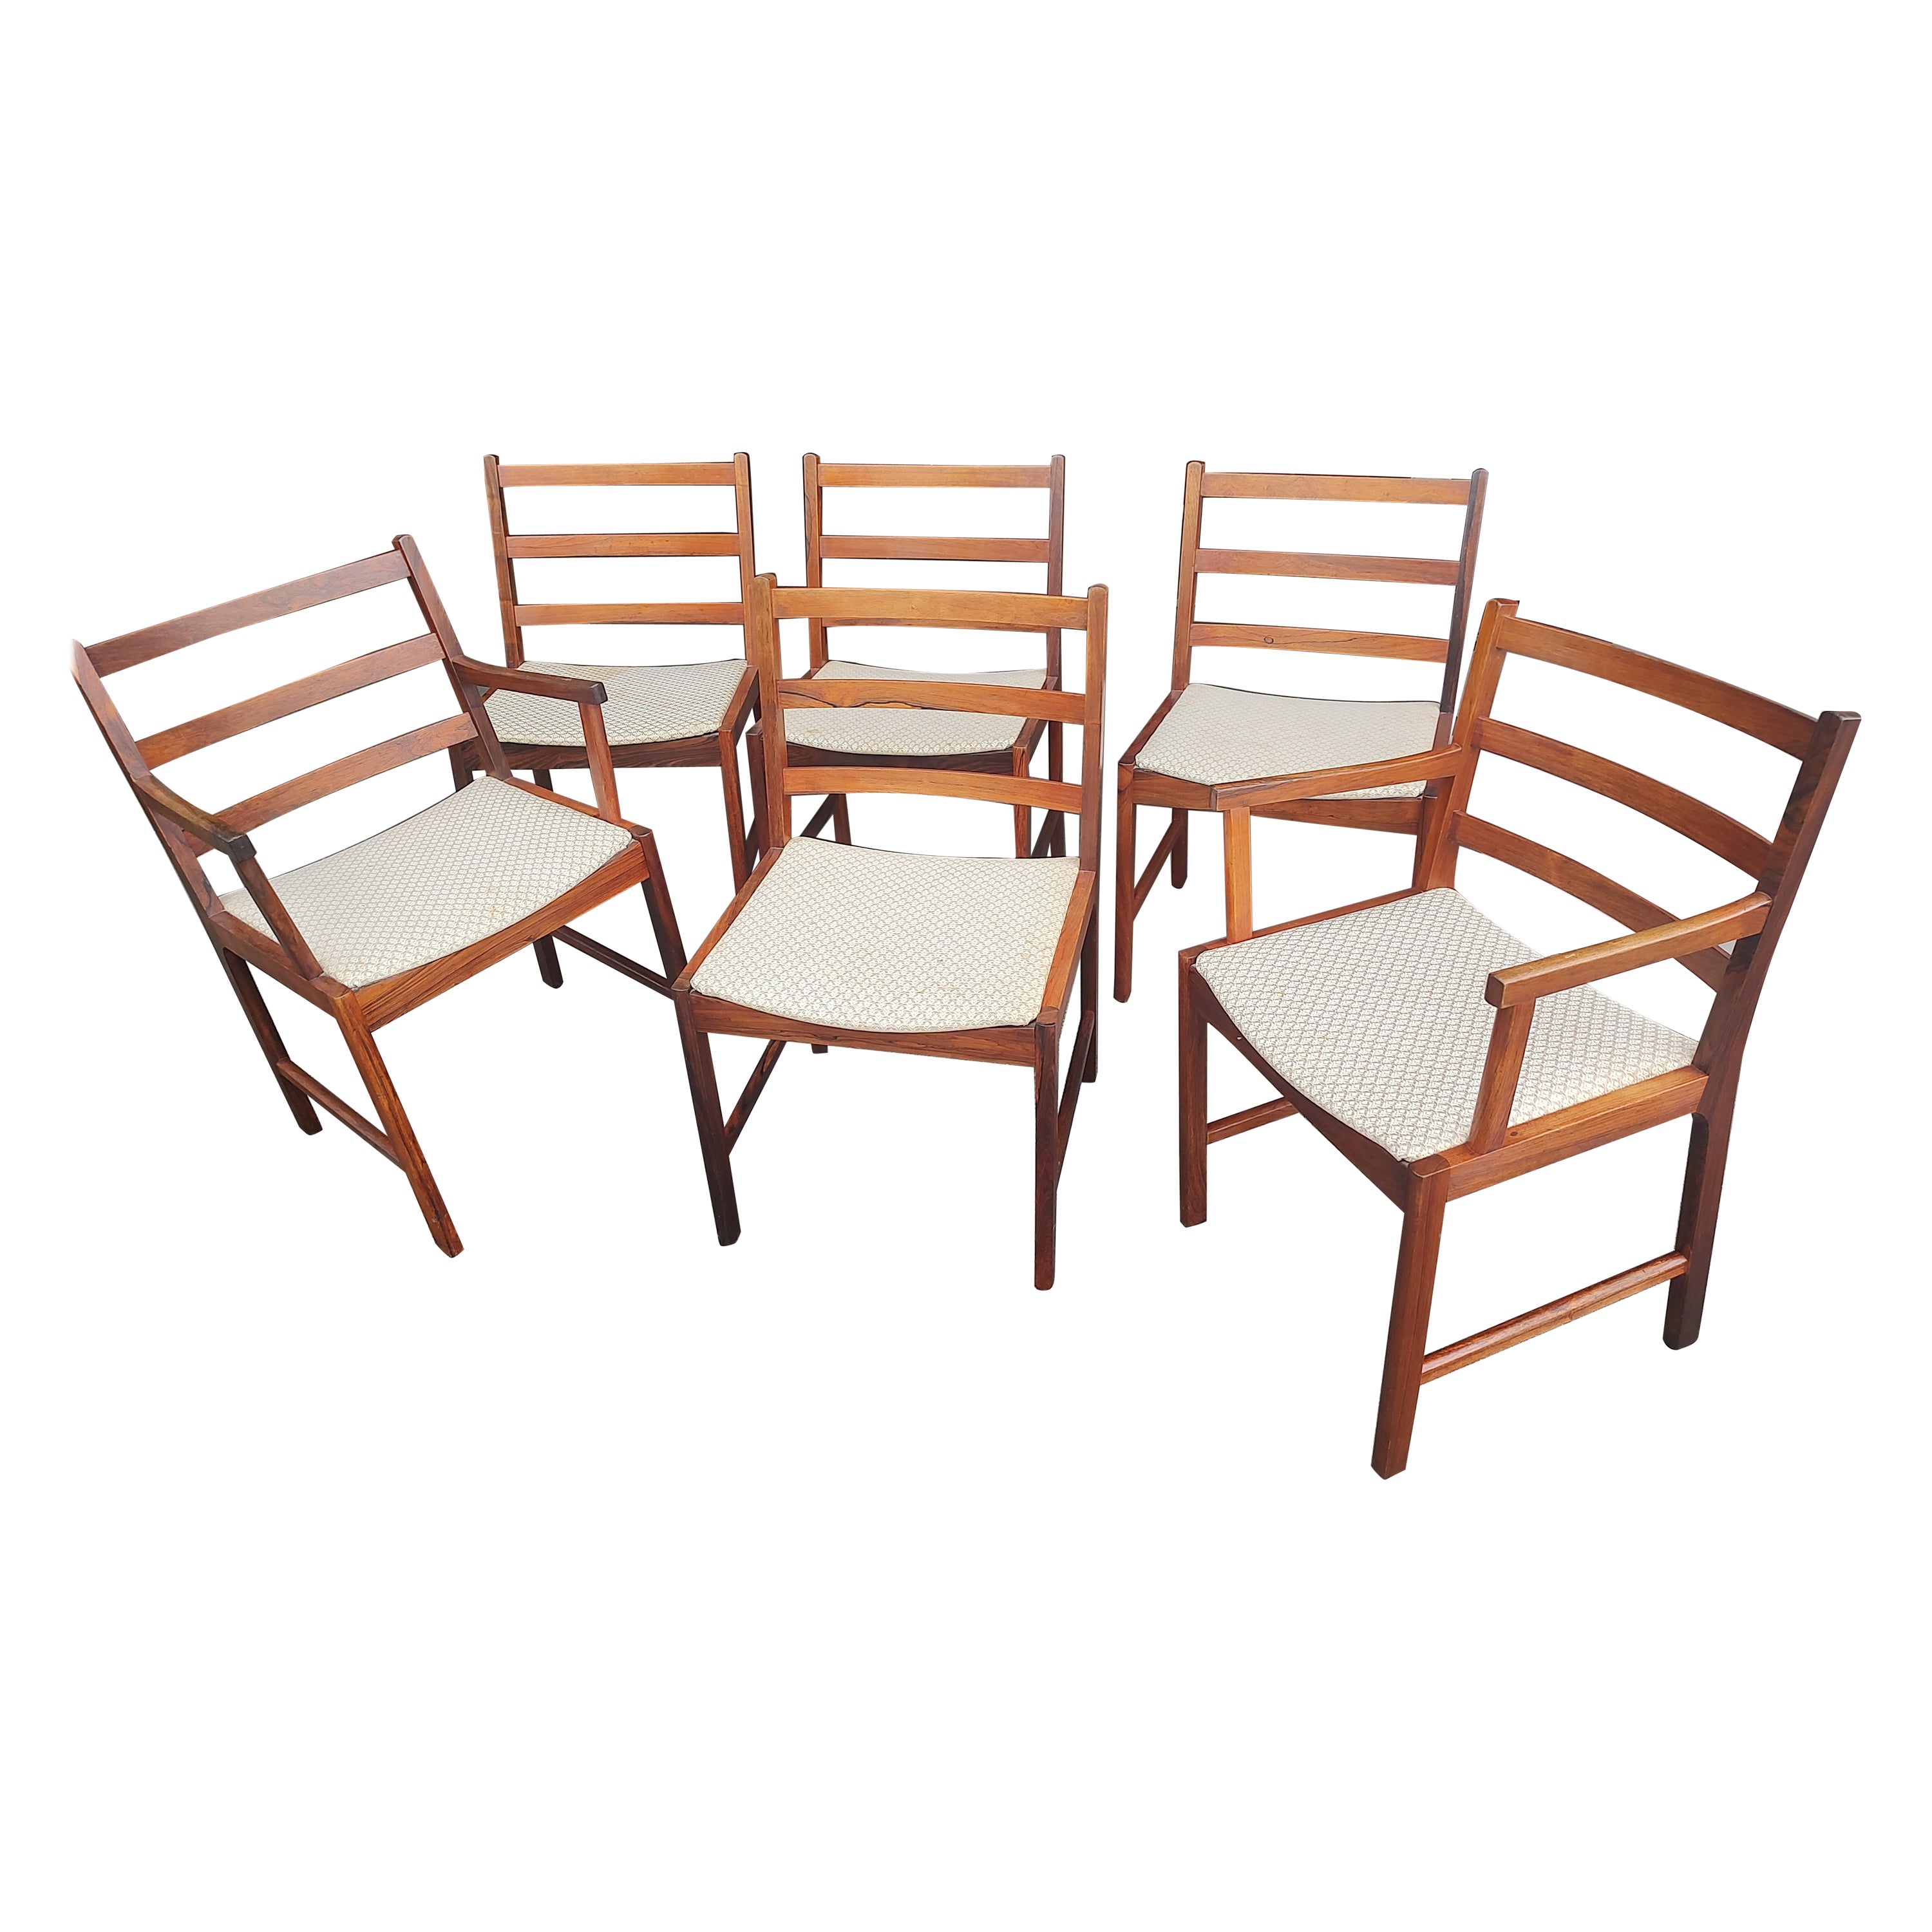 Mid-Century Modern Danish Rosewood Set of 6 Dining Chairs Style of Niels Moller In Good Condition For Sale In Port Jervis, NY